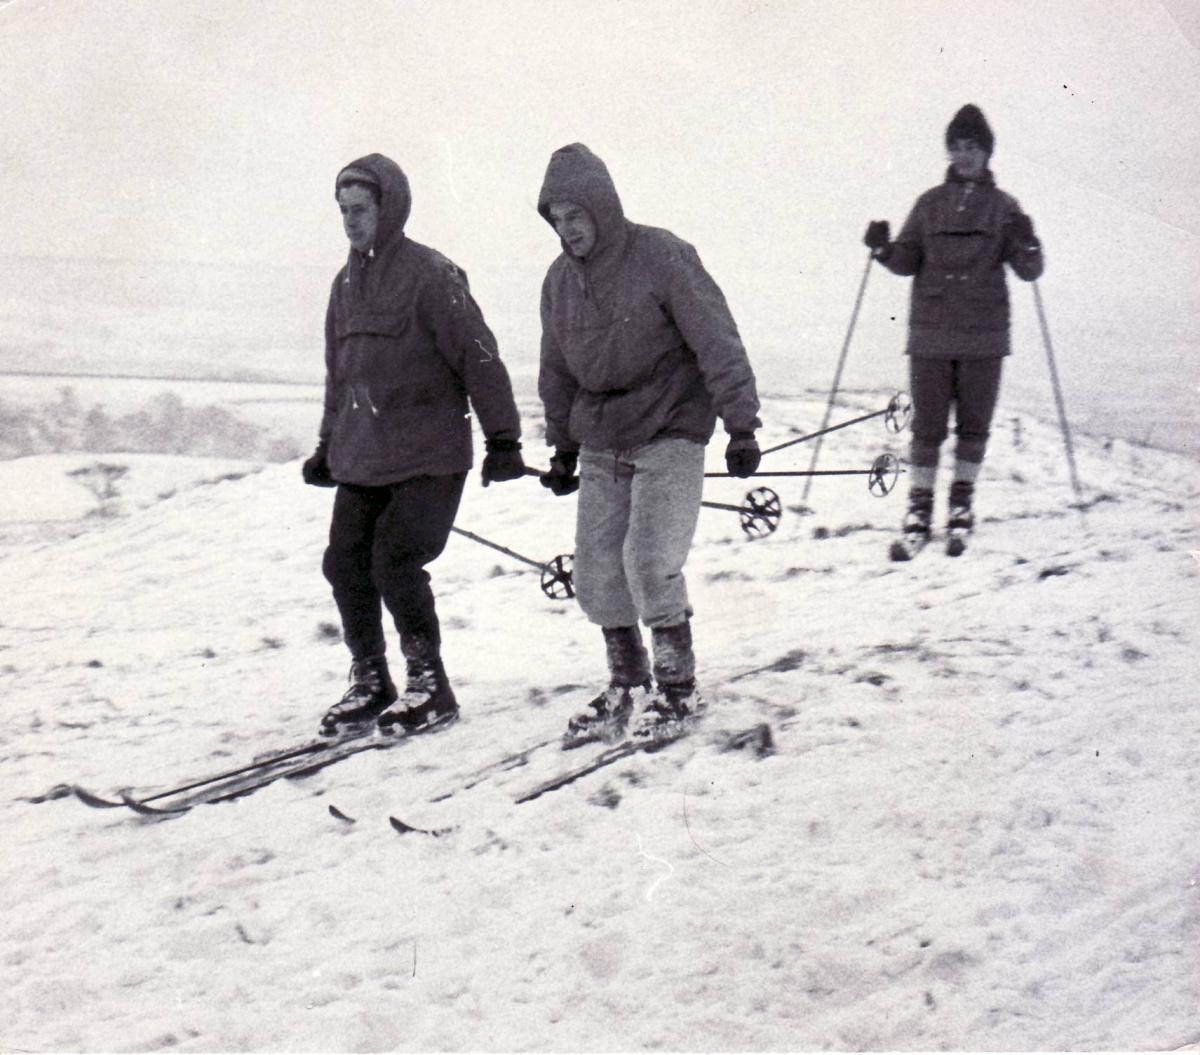 January 1965 - Skiing in Belmont